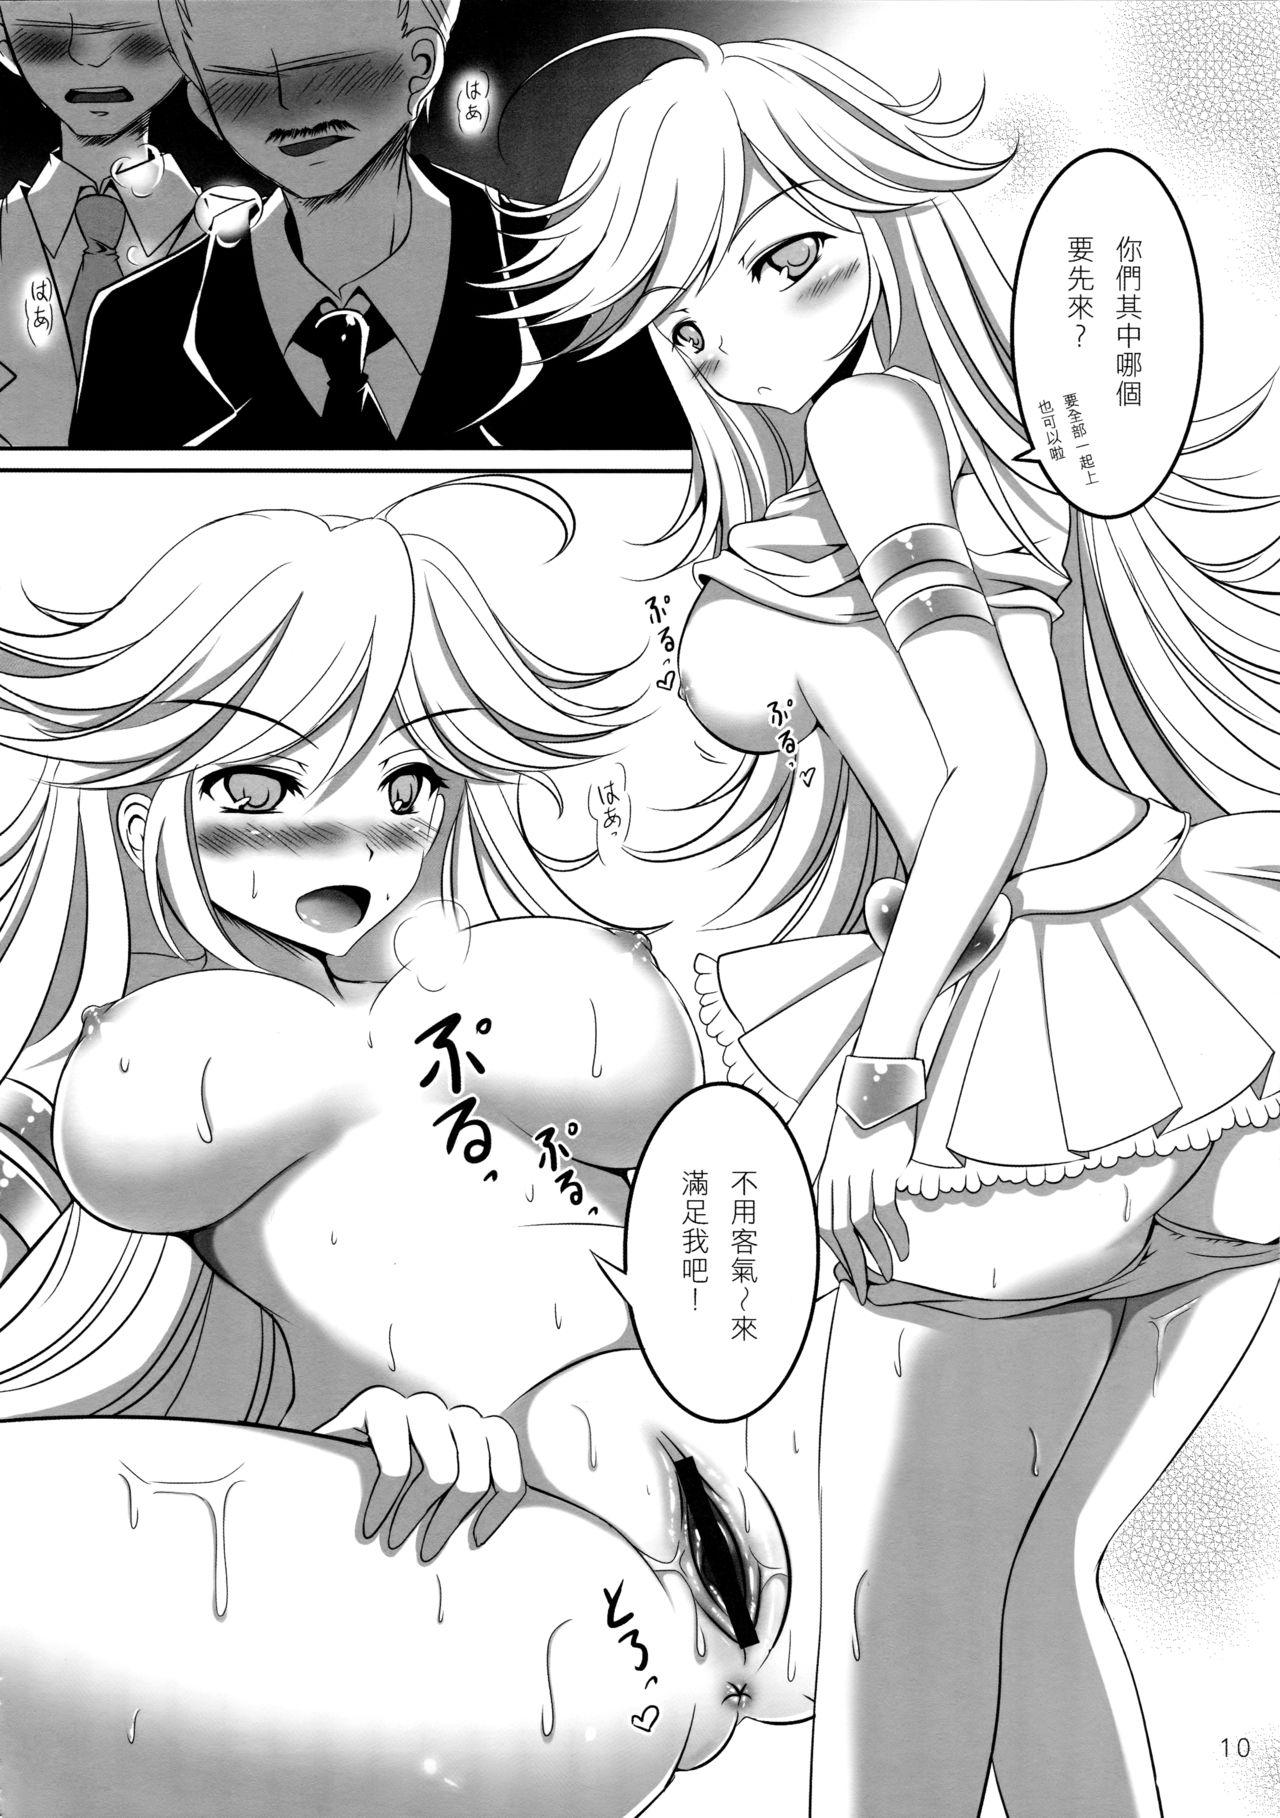 Ass Fuck Angel Bitches! - Panty and stocking with garterbelt Hot Blow Jobs - Page 10